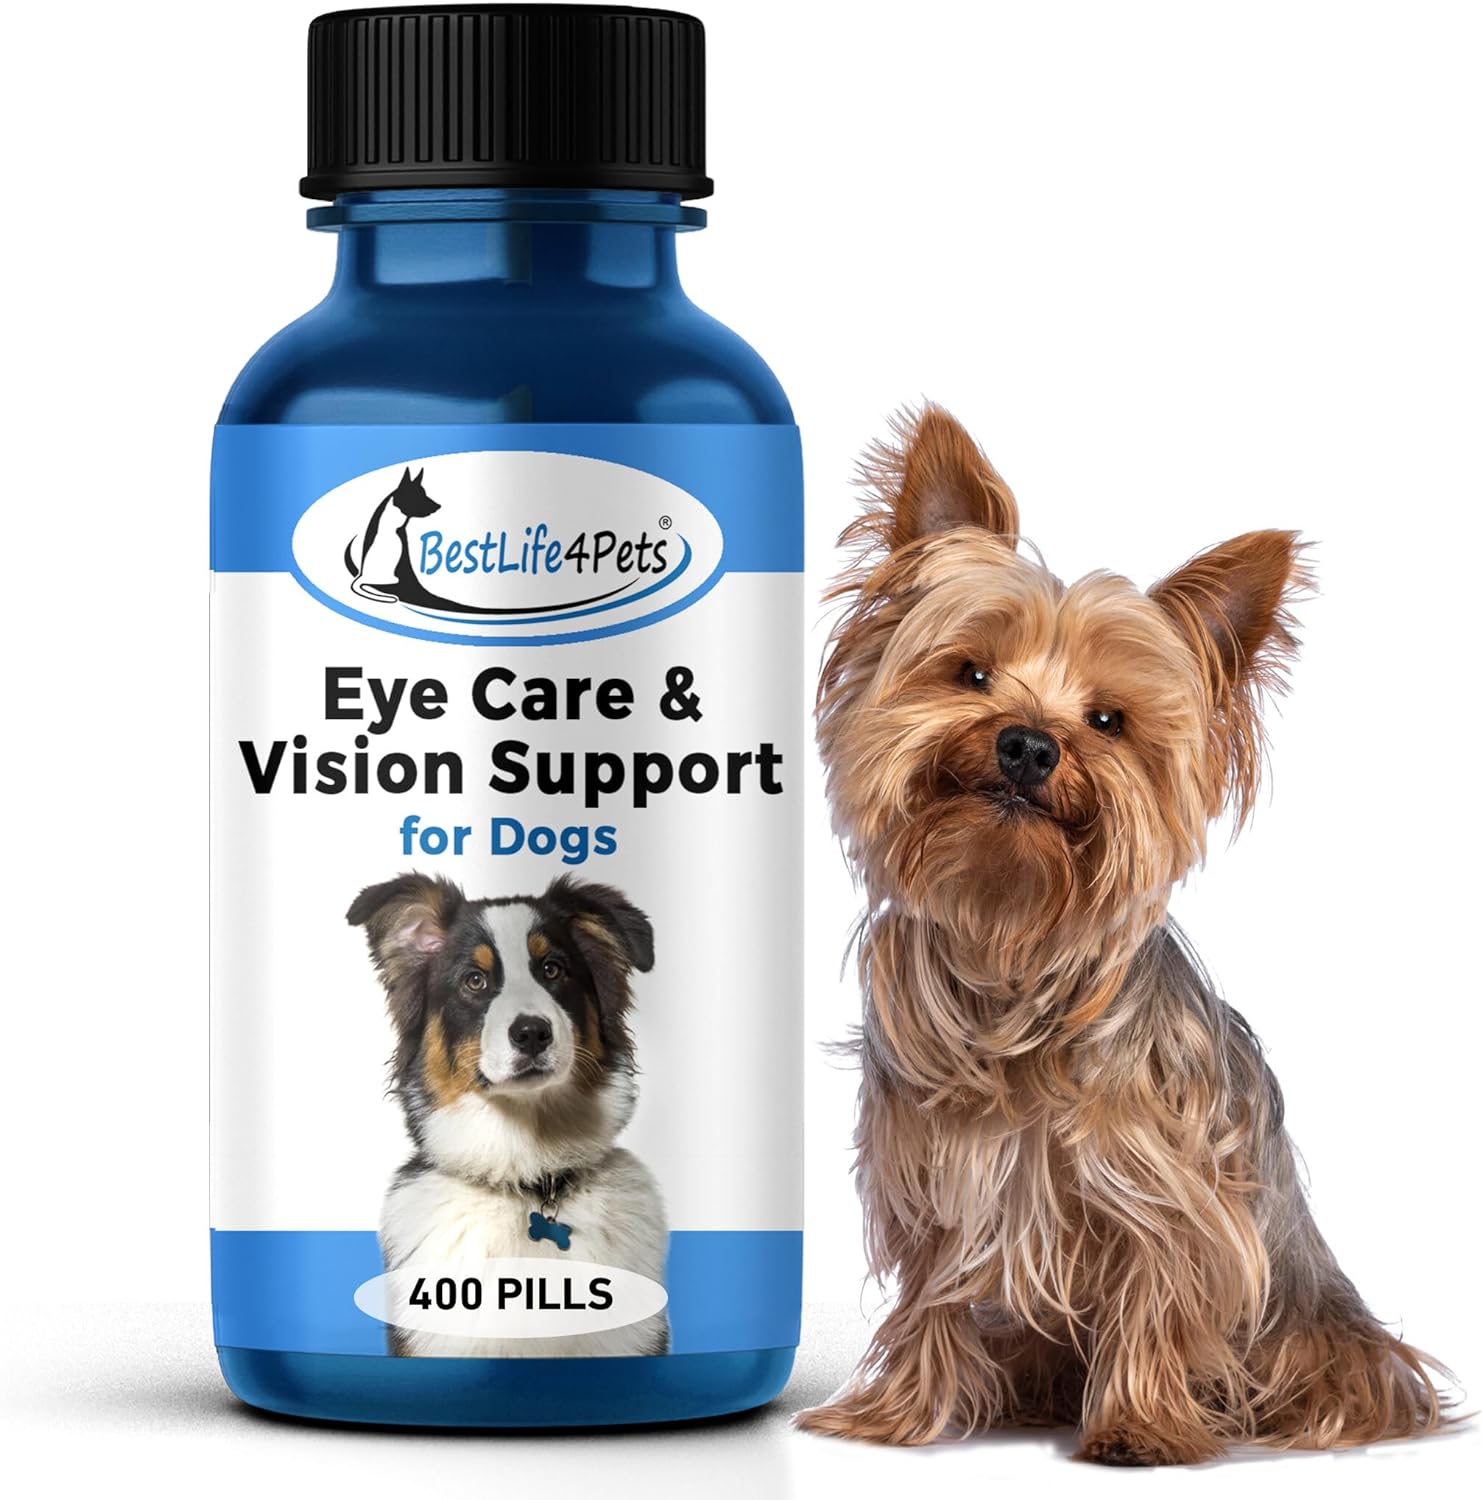 Eye Care and Vision Support Dog Supplement - Natural Eye Infection Treatment Relieves Conjunctivitis, Swelling, Discharge, and More - Stop The Dog Eye Drops Struggle with Easy to Use Pills